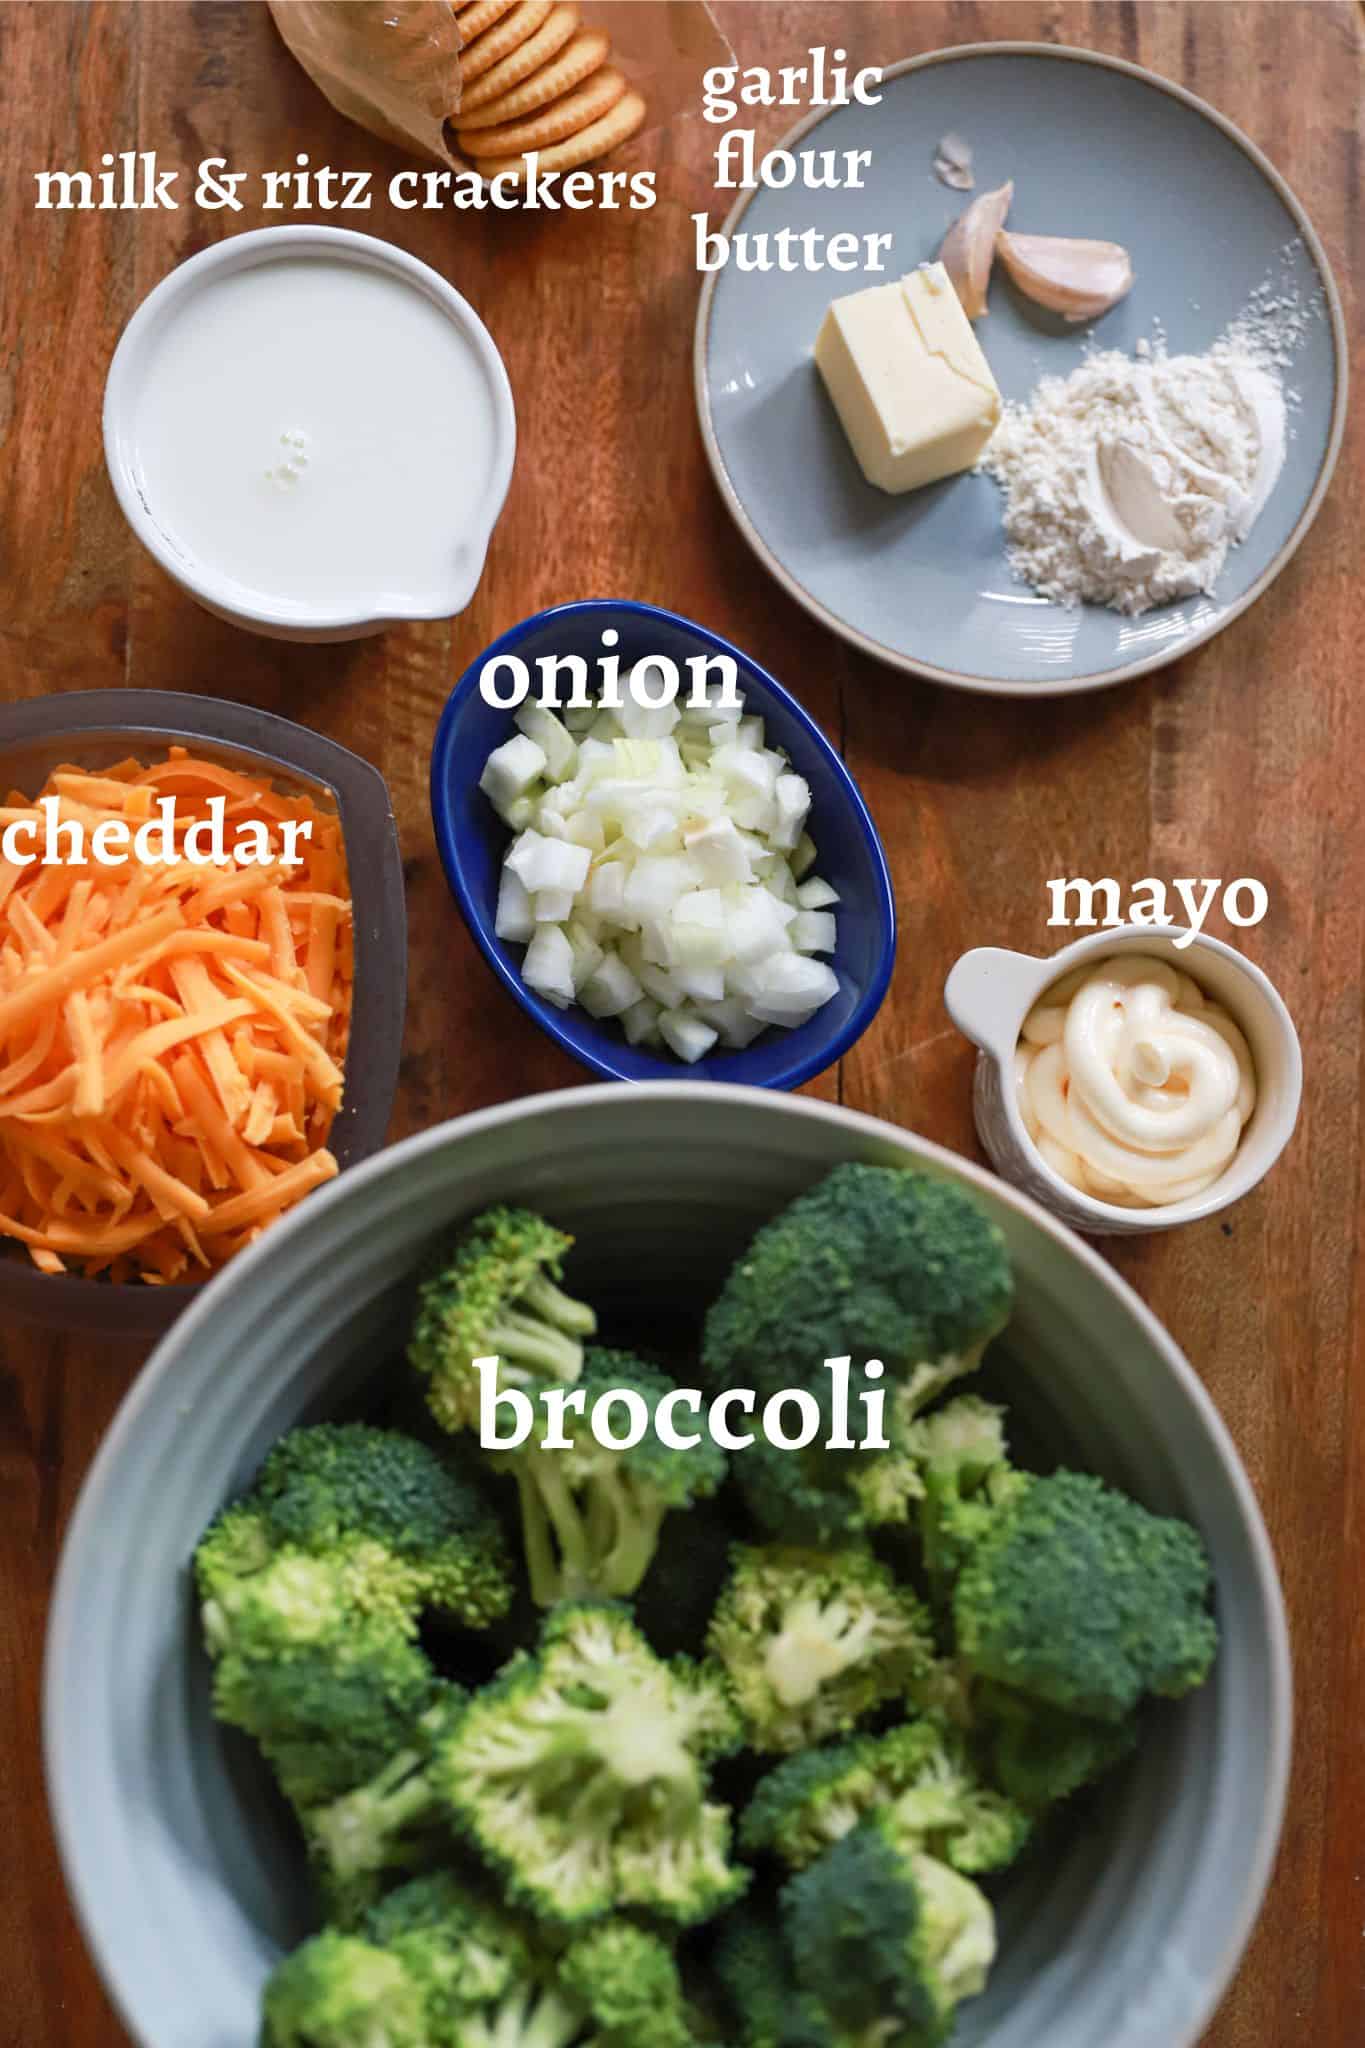 image with labeled ingredients for broccoli casserole.